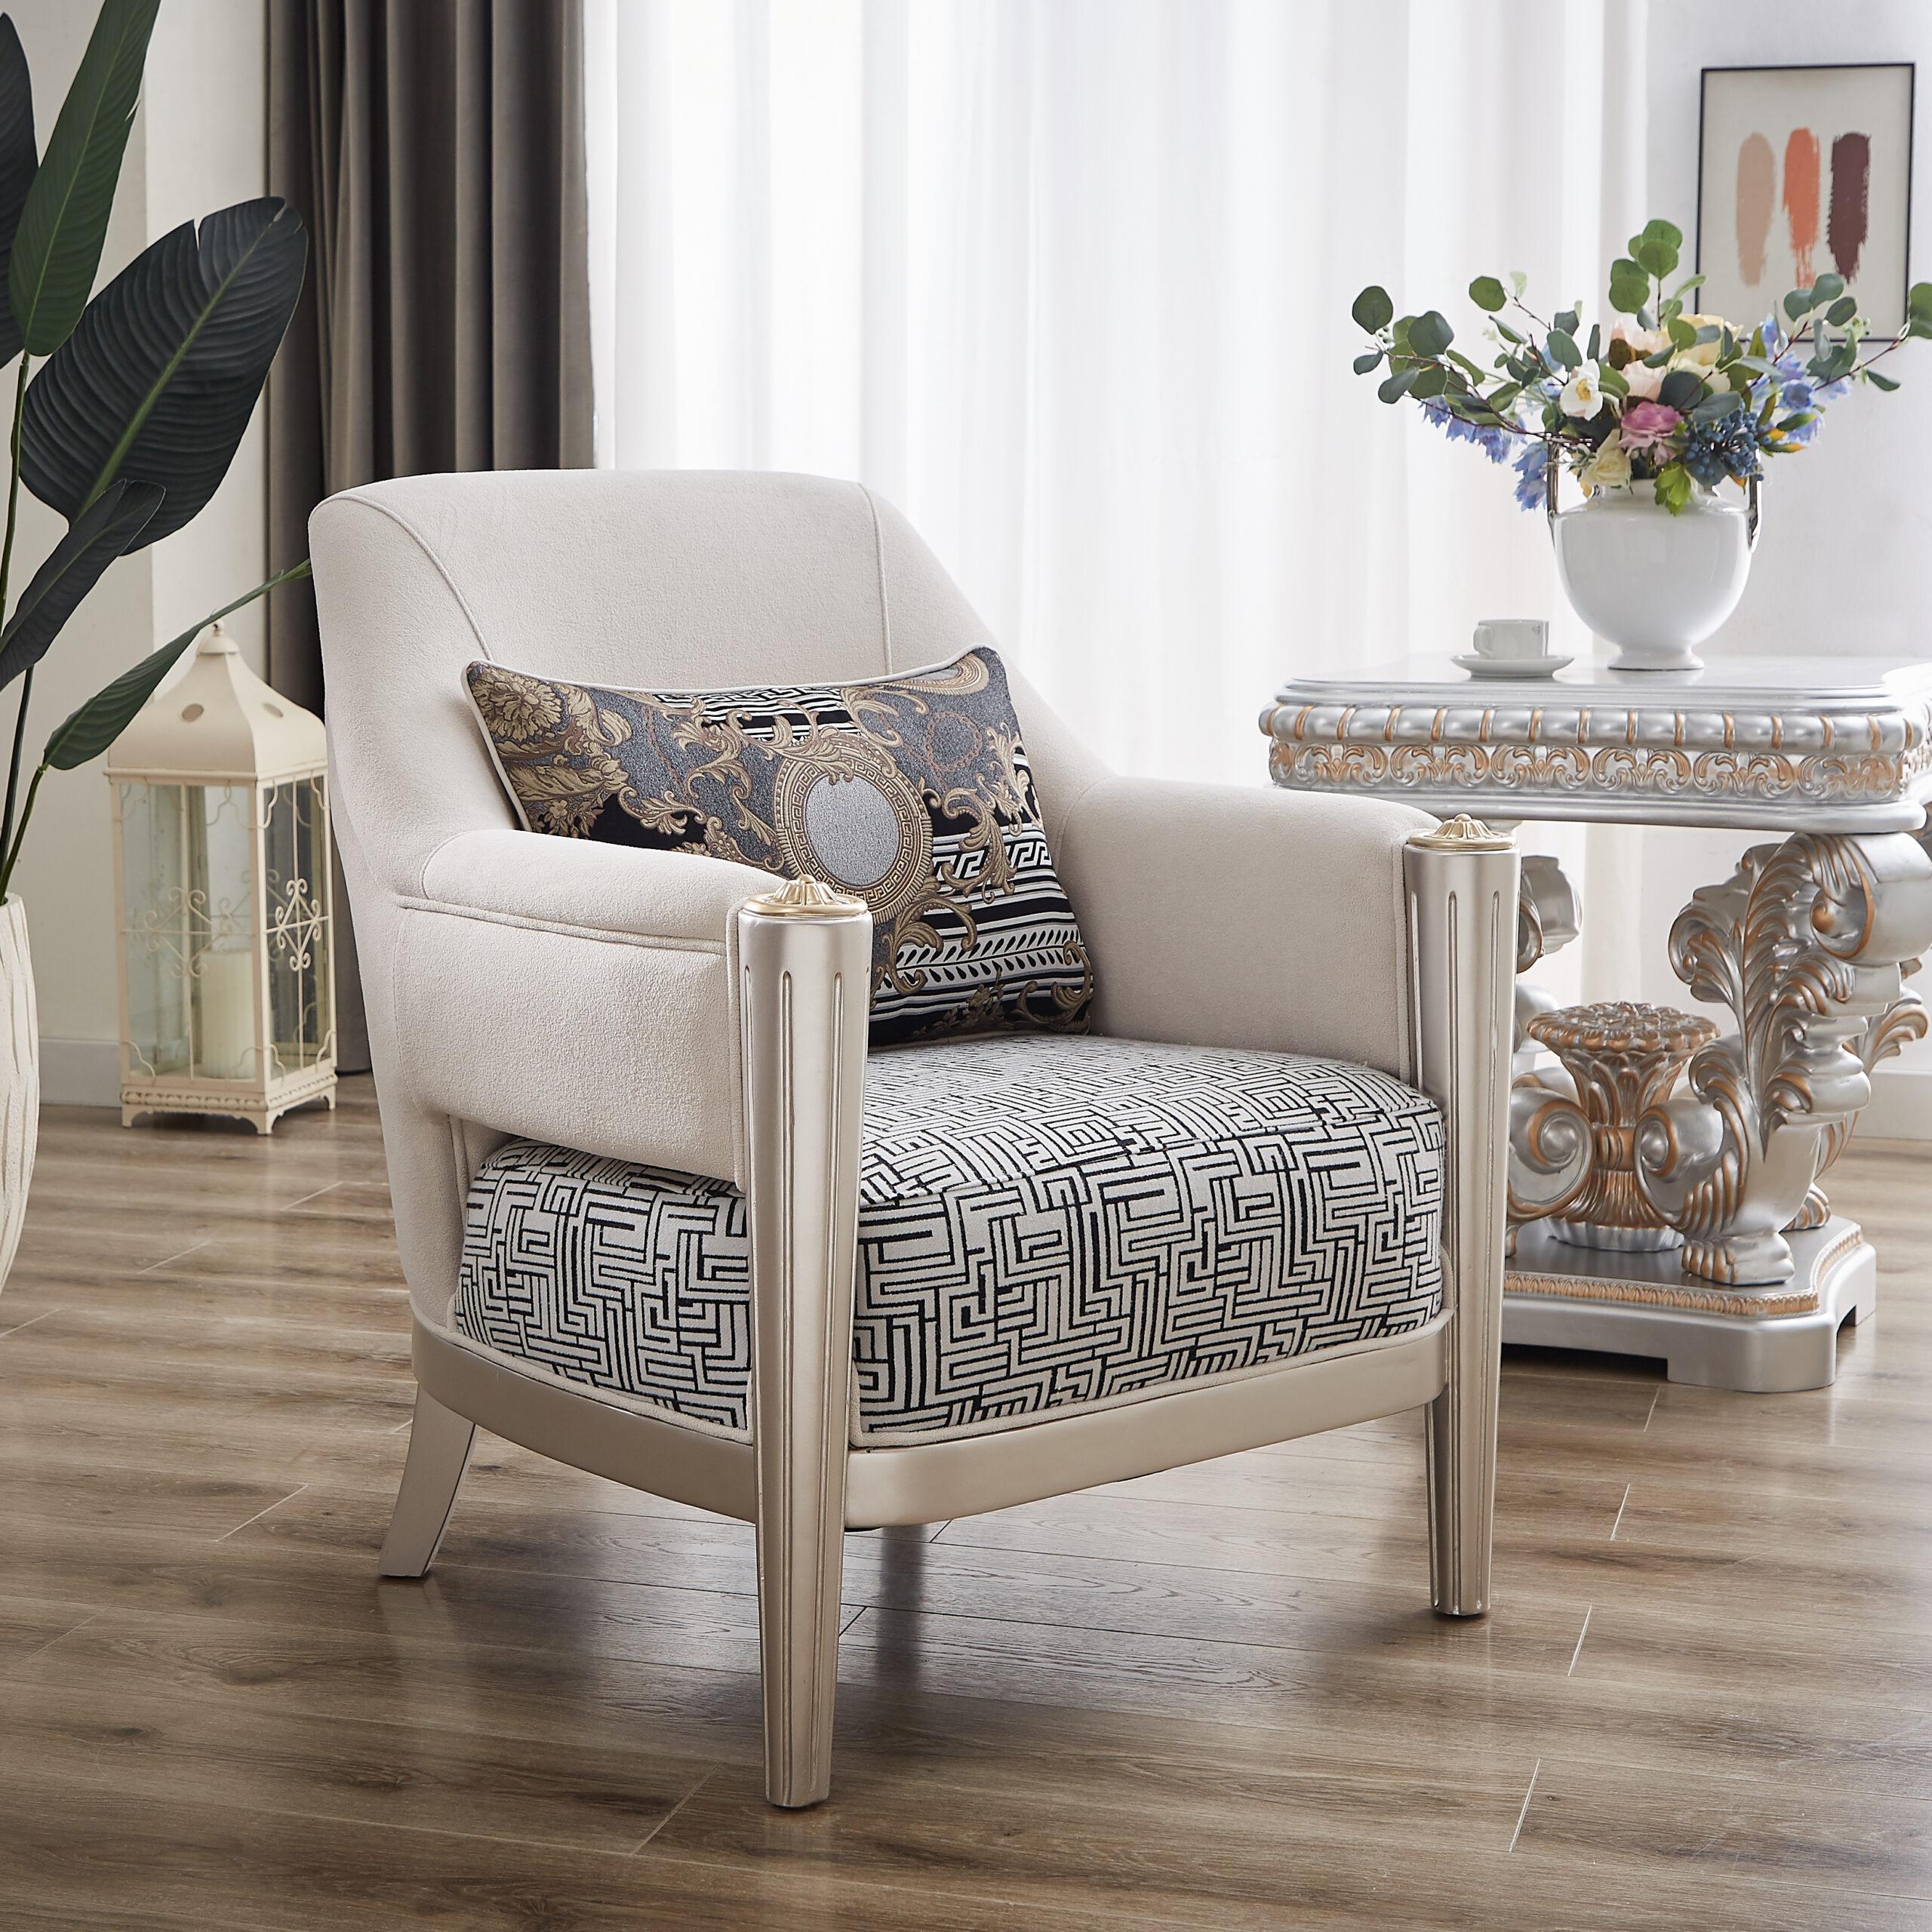 Classic, Traditional Chair HD-9038 Chair HD-C9038 HD-C9038 in White, Gray, Gold Fabric